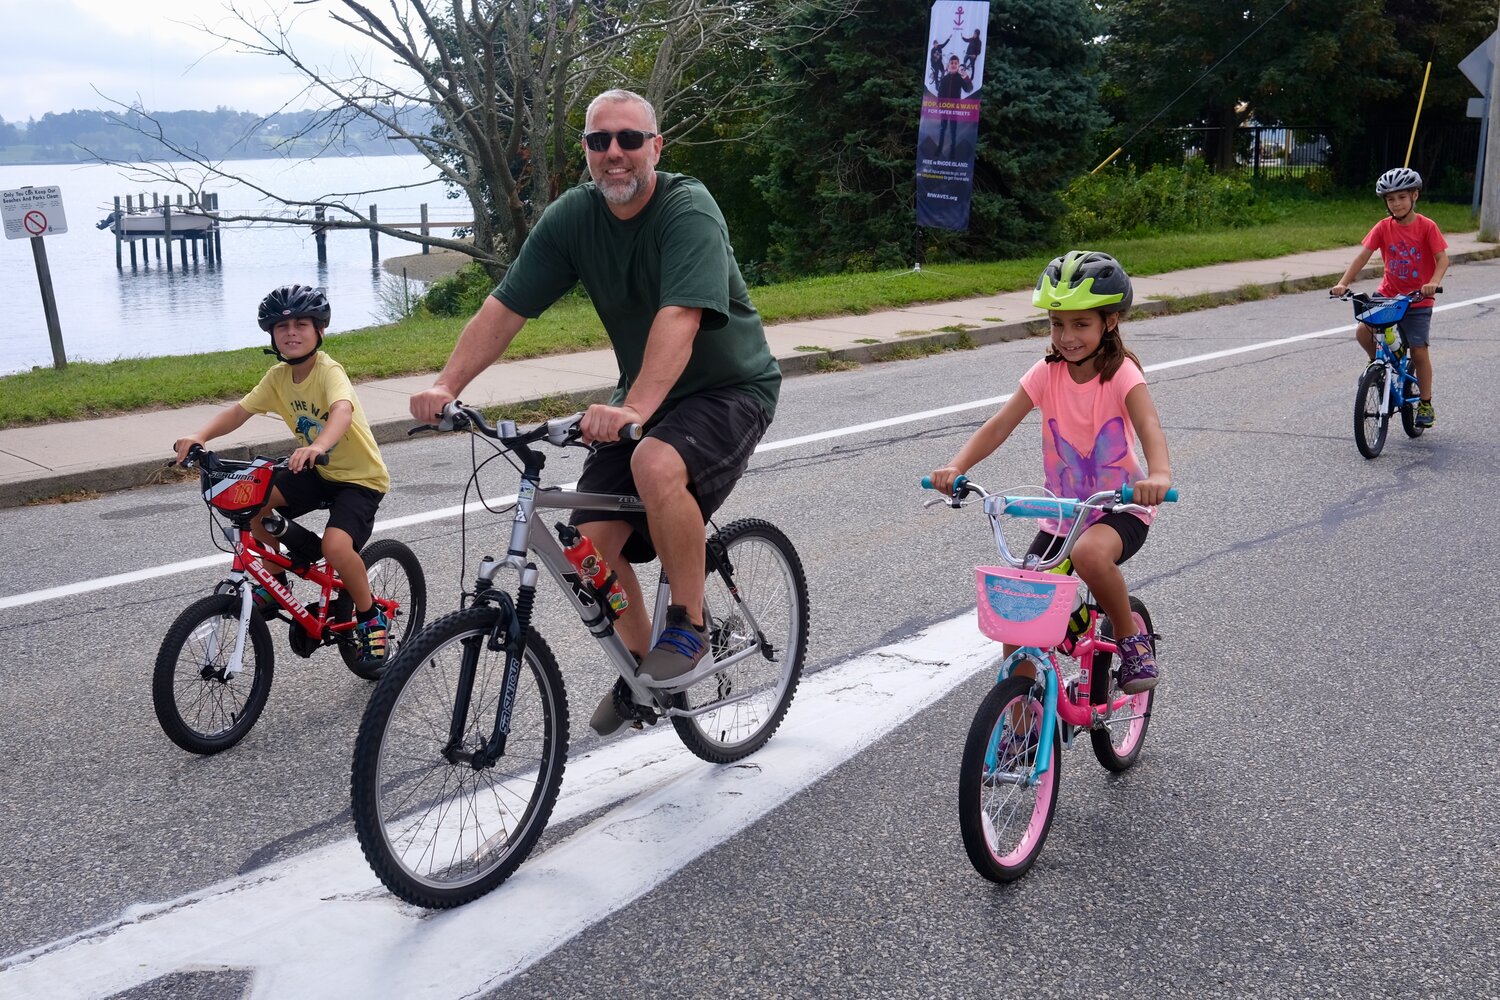 Members of the Cote family from Dartmouth pedal their bikes along Park Avenue during the inaugural Sakonnet Coastal Bike and Stroll held Saturday. Jeremy Cote leads his children (from left) Jack, 8, Georgia, 6, and Sam, 6. Park Avenue, Hummocks Avenue and a portion of Anthony Road into Common Fence Point were shut down to motor vehicles so cyclists and pedestrians could enjoy a safe, car-free ride.